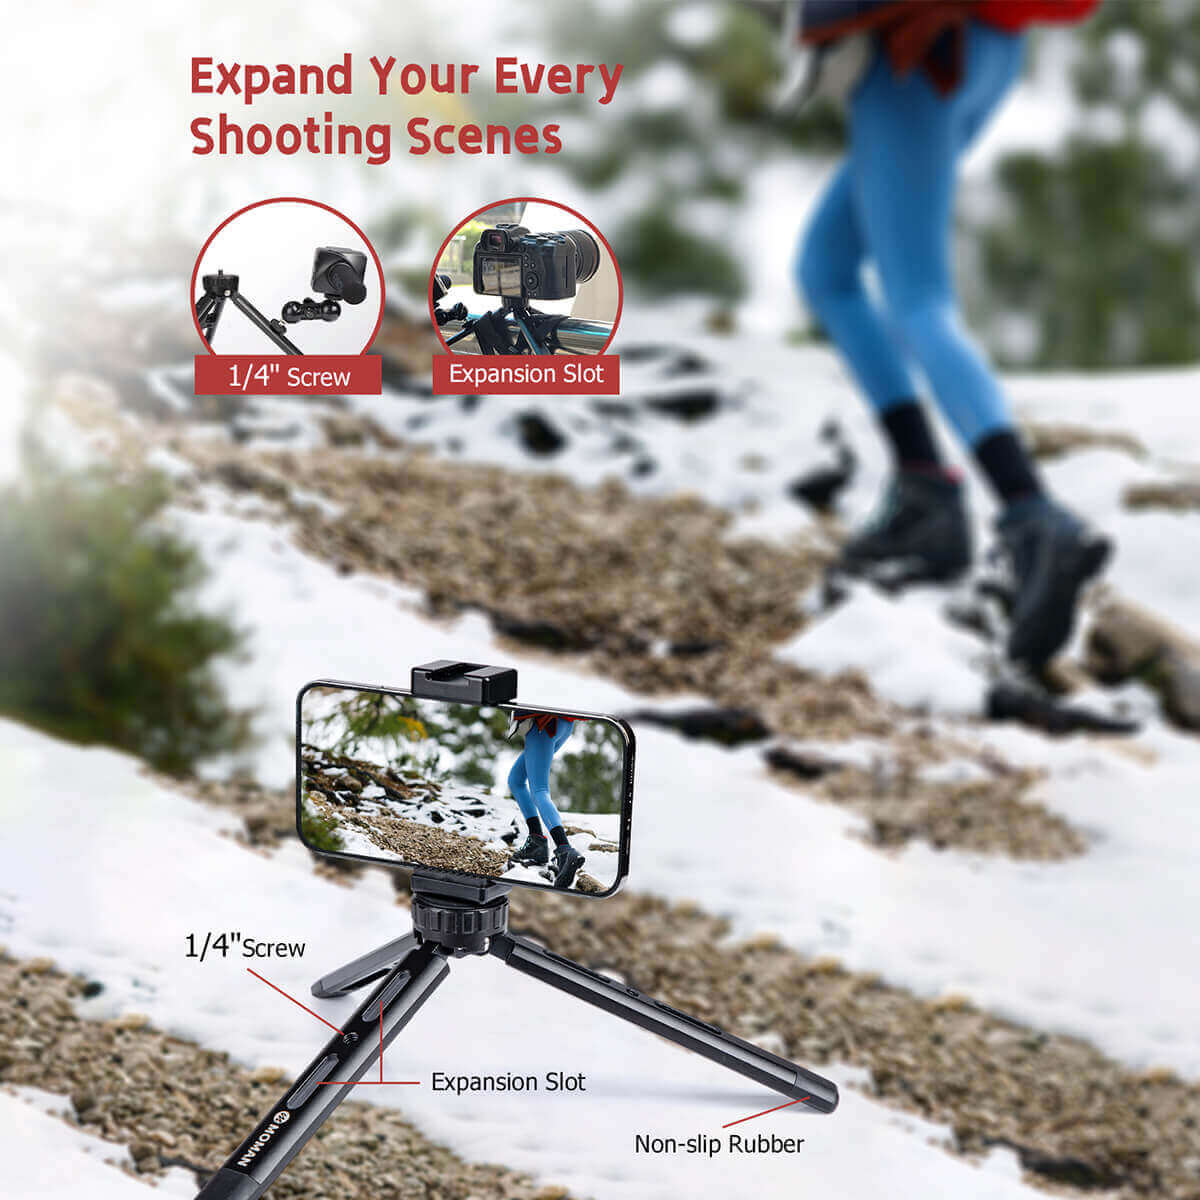 Moman TR01S small tripod for camera is designed to have 1/4